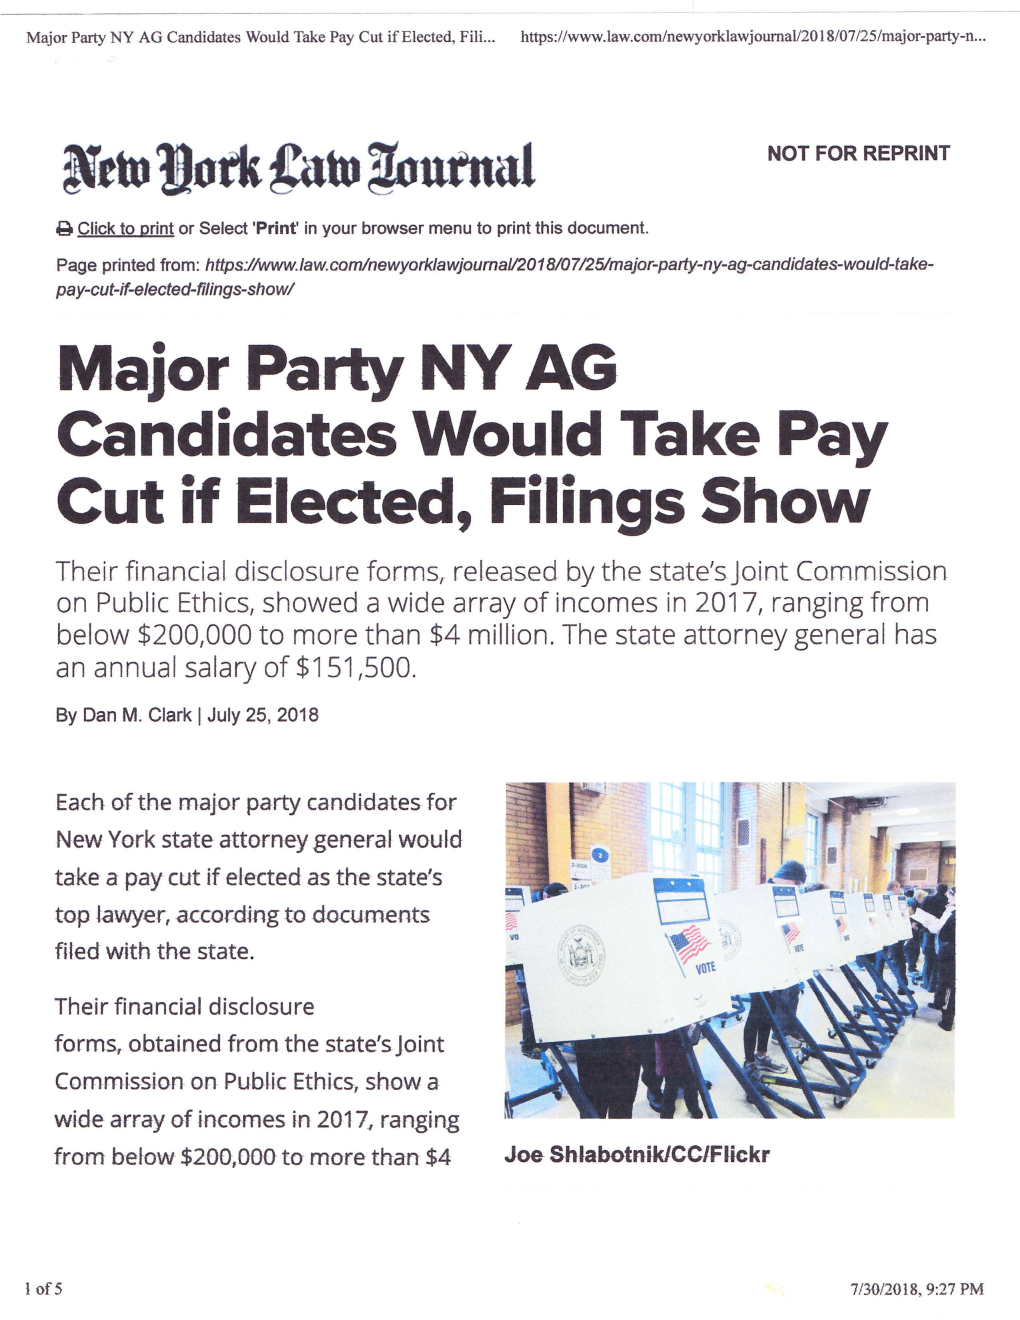 Major Party NY AG Candidates Would Take Pay Cut If Elected, Filings Show